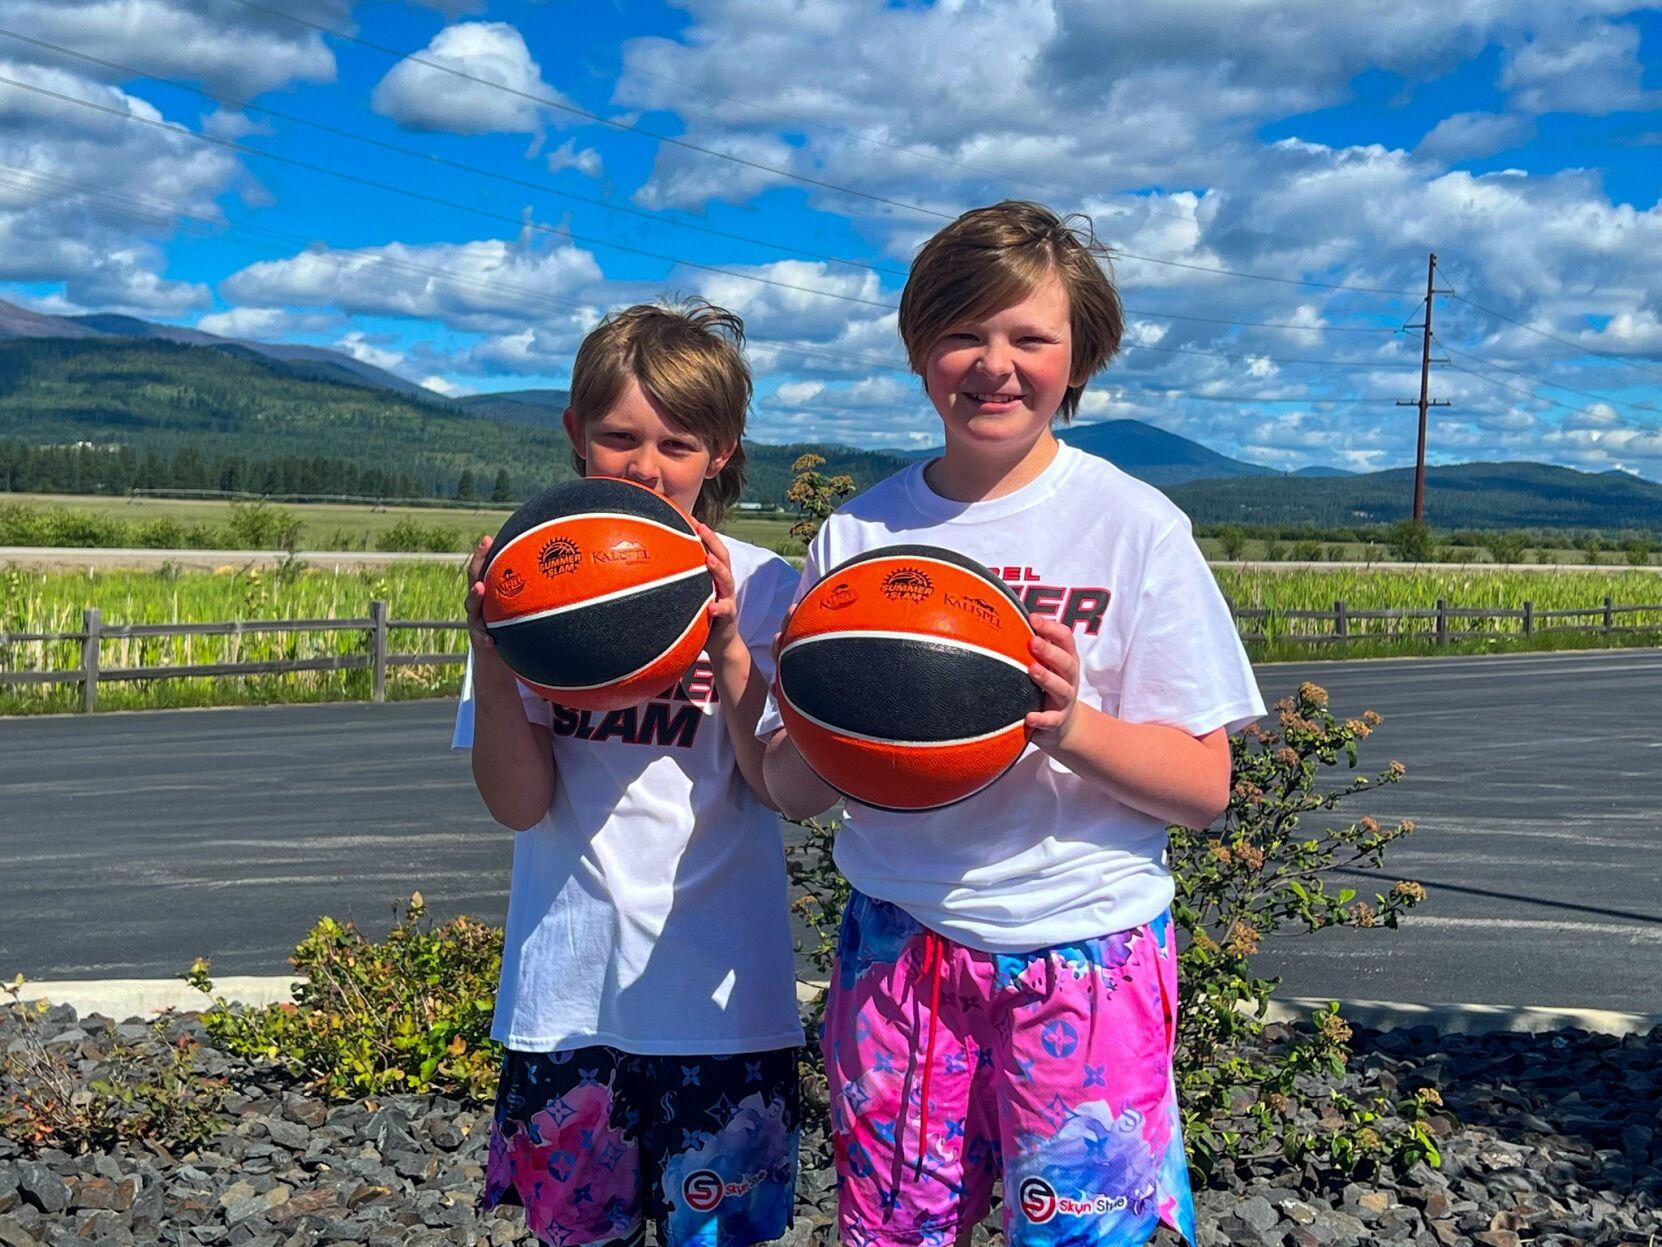 Kalispell Summer Slam in Cusick promoting youth wellbeing [Video]